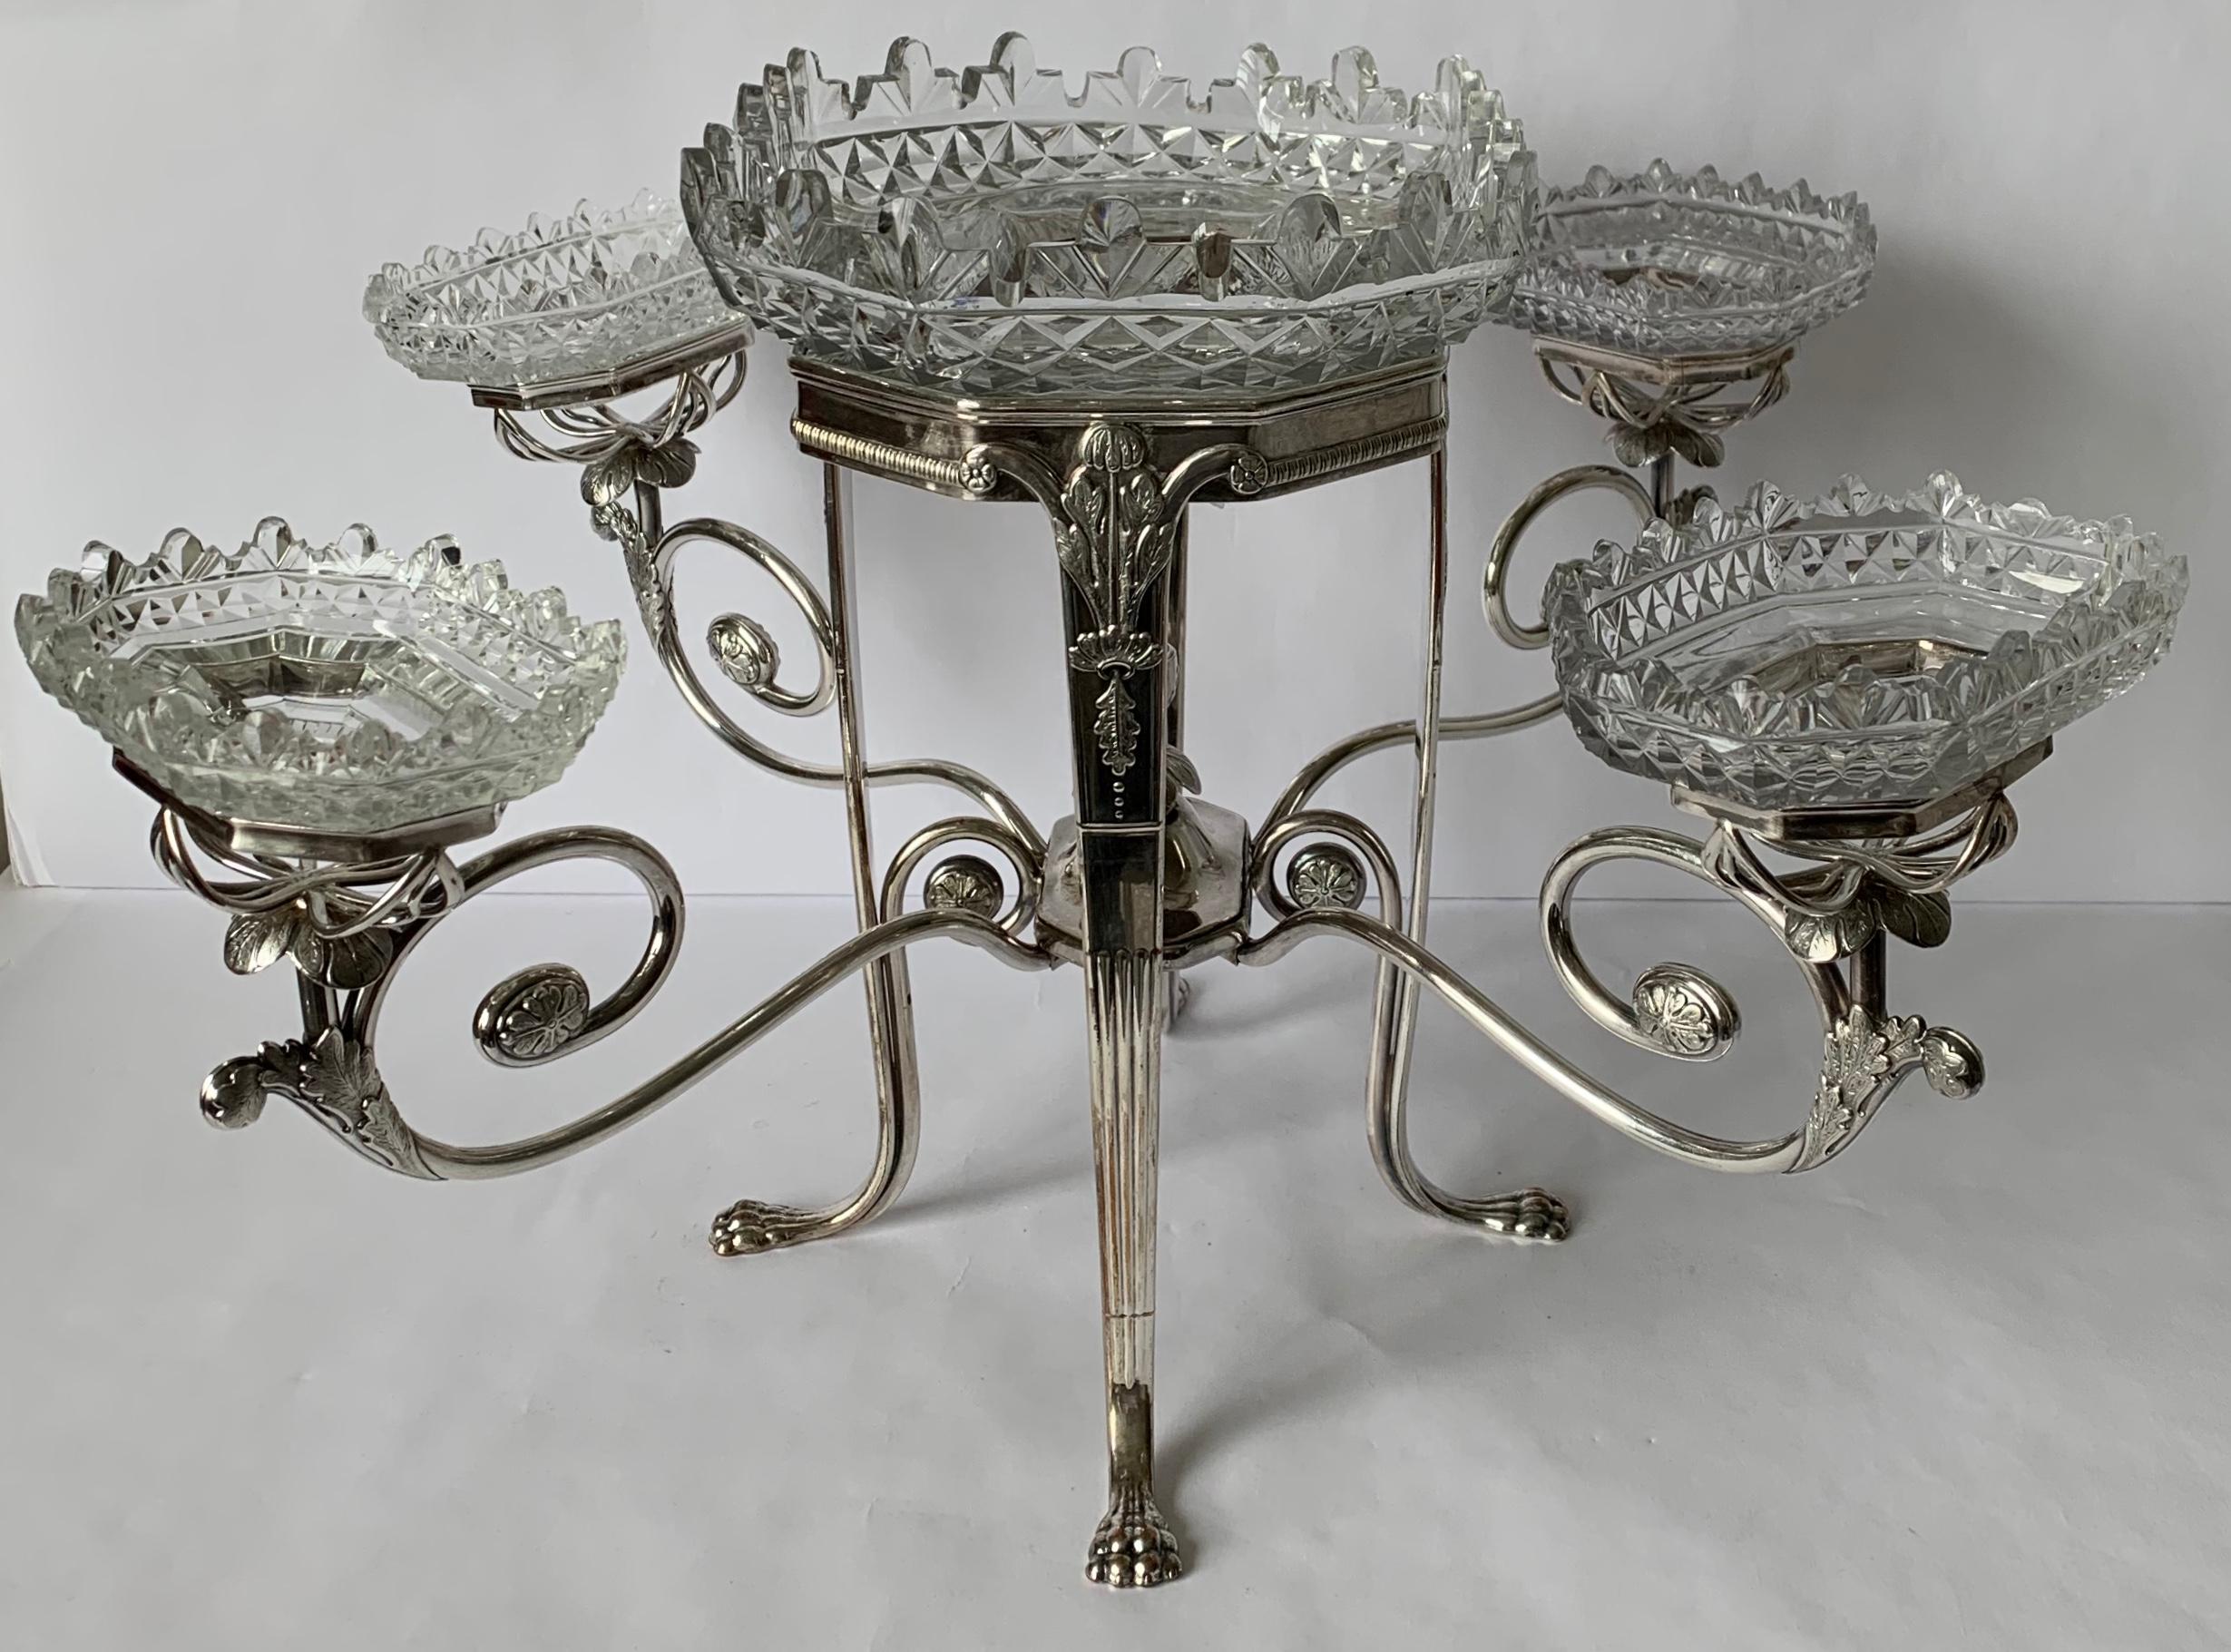 Antique English Silver Plated and Cut Glass Epergne 9